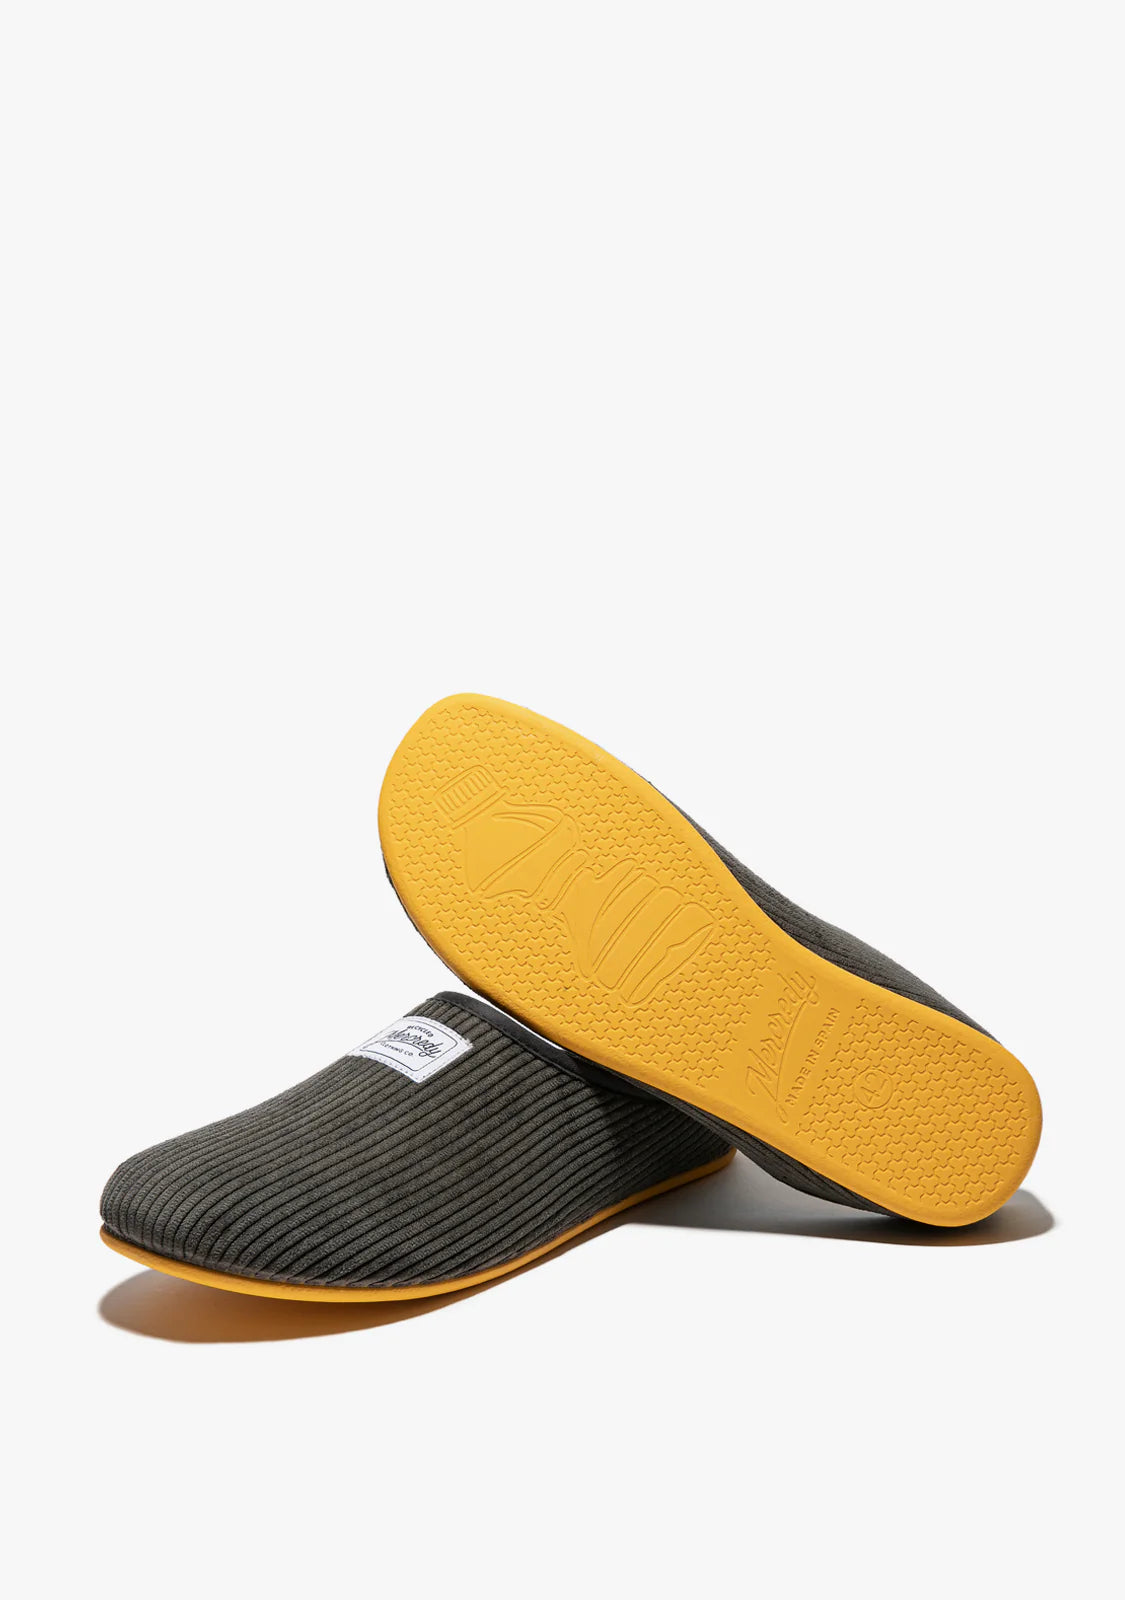 Mercredy Black/Yellow Soft Cord Slippers-Mens-Ohh! By Gum - Shop Sustainable